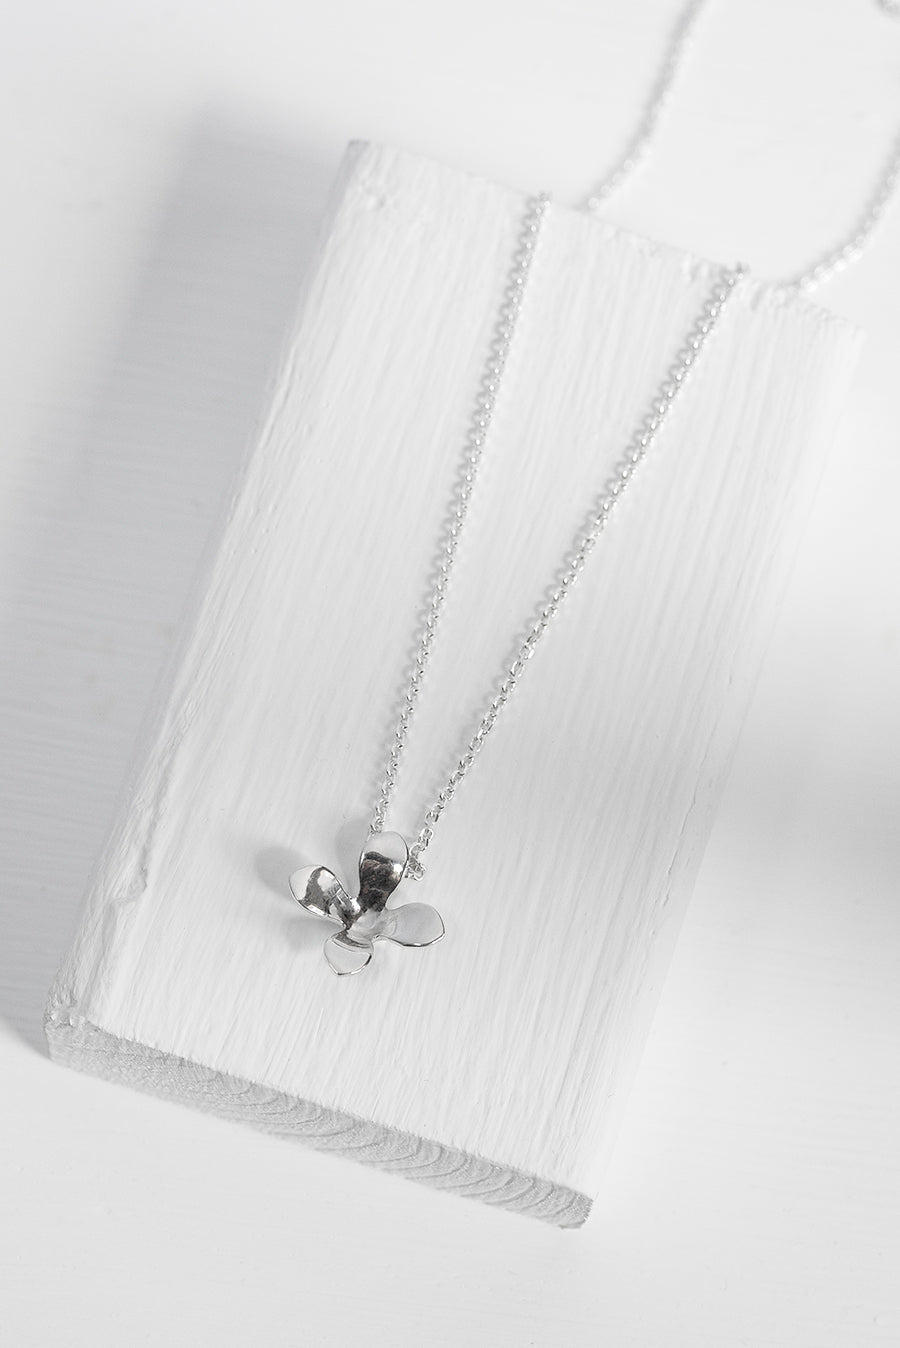 Forget me not medium necklace